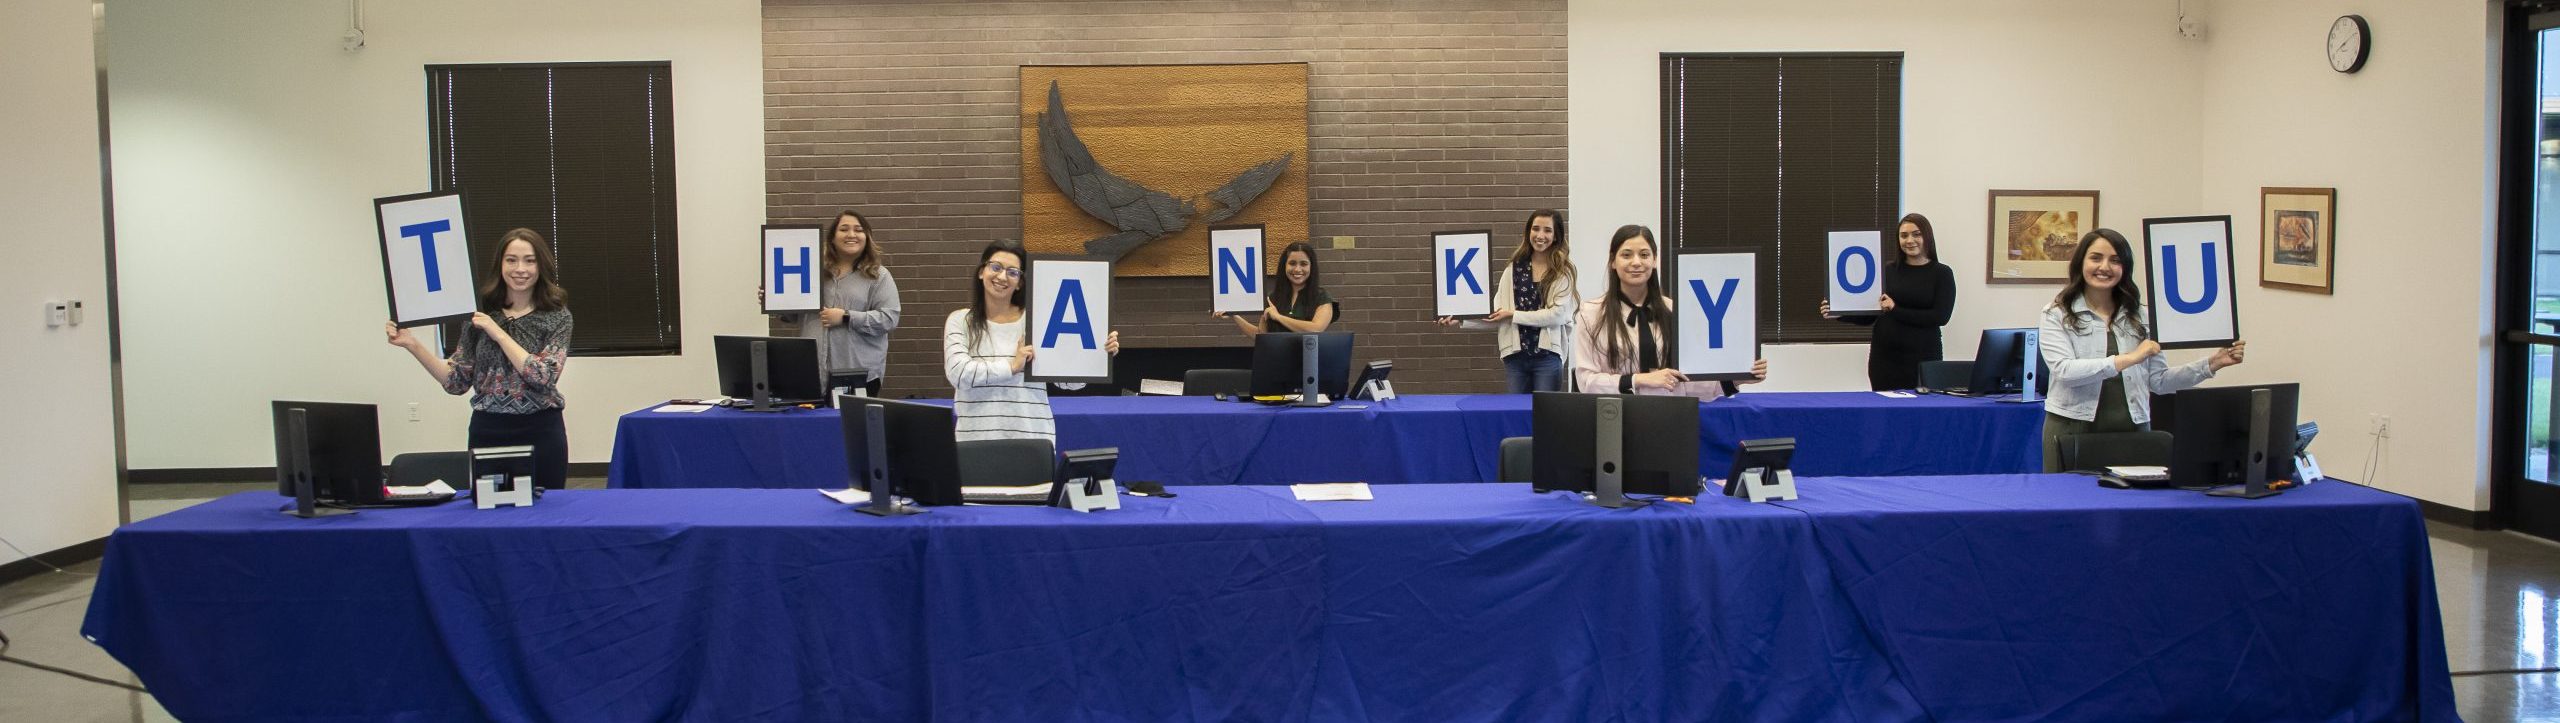 Student phone operators holding Thank You Sign